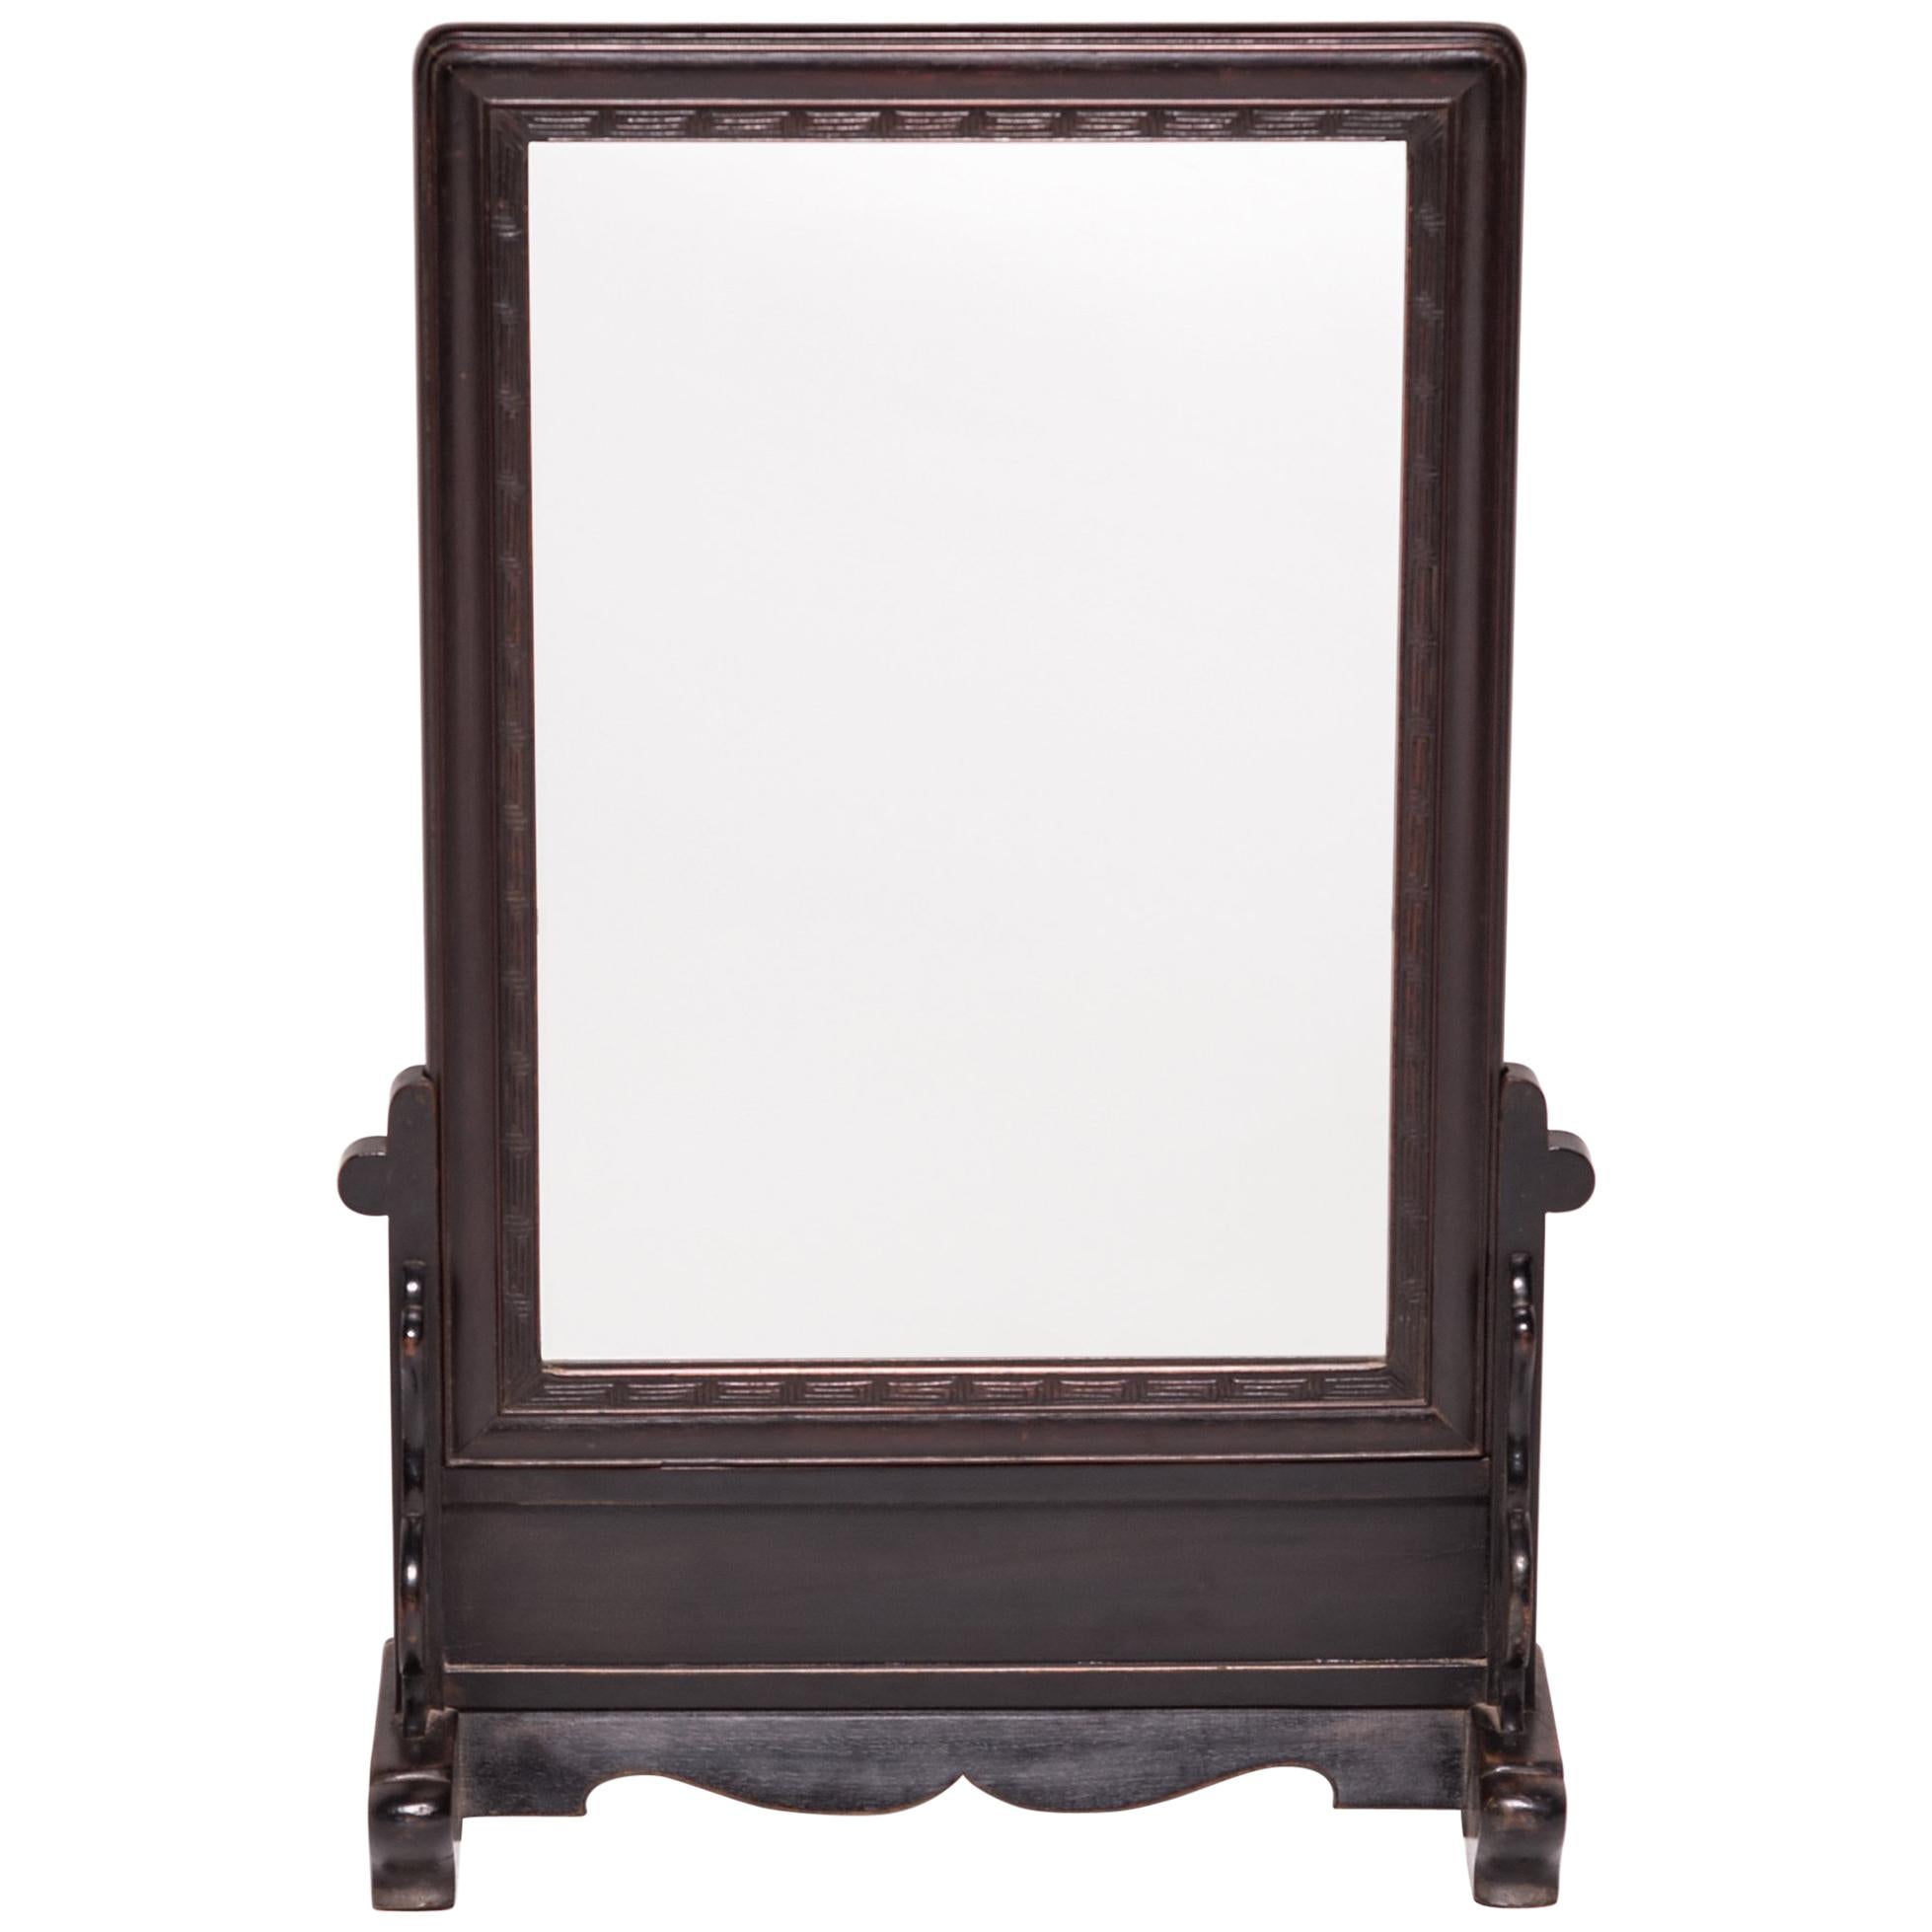 Chinese Table Screen Mirror, c. 1850 For Sale